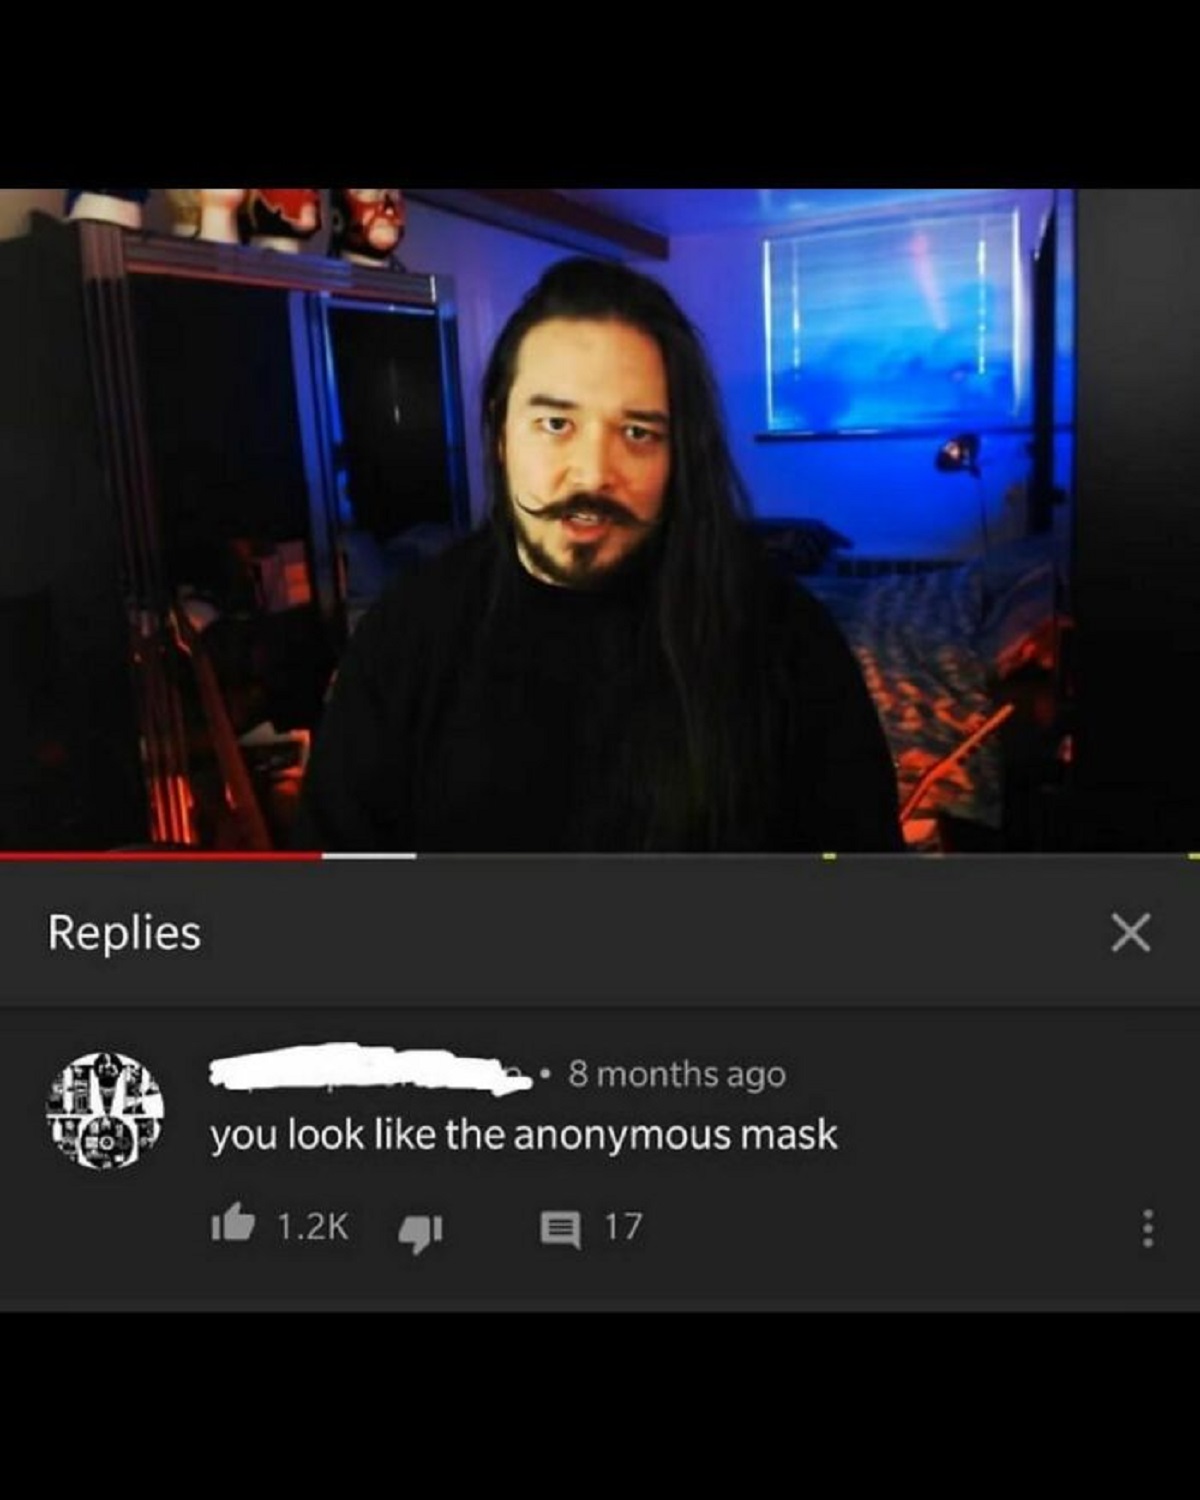 screenshot - Replies 8 months ago you look the anonymous mask 17